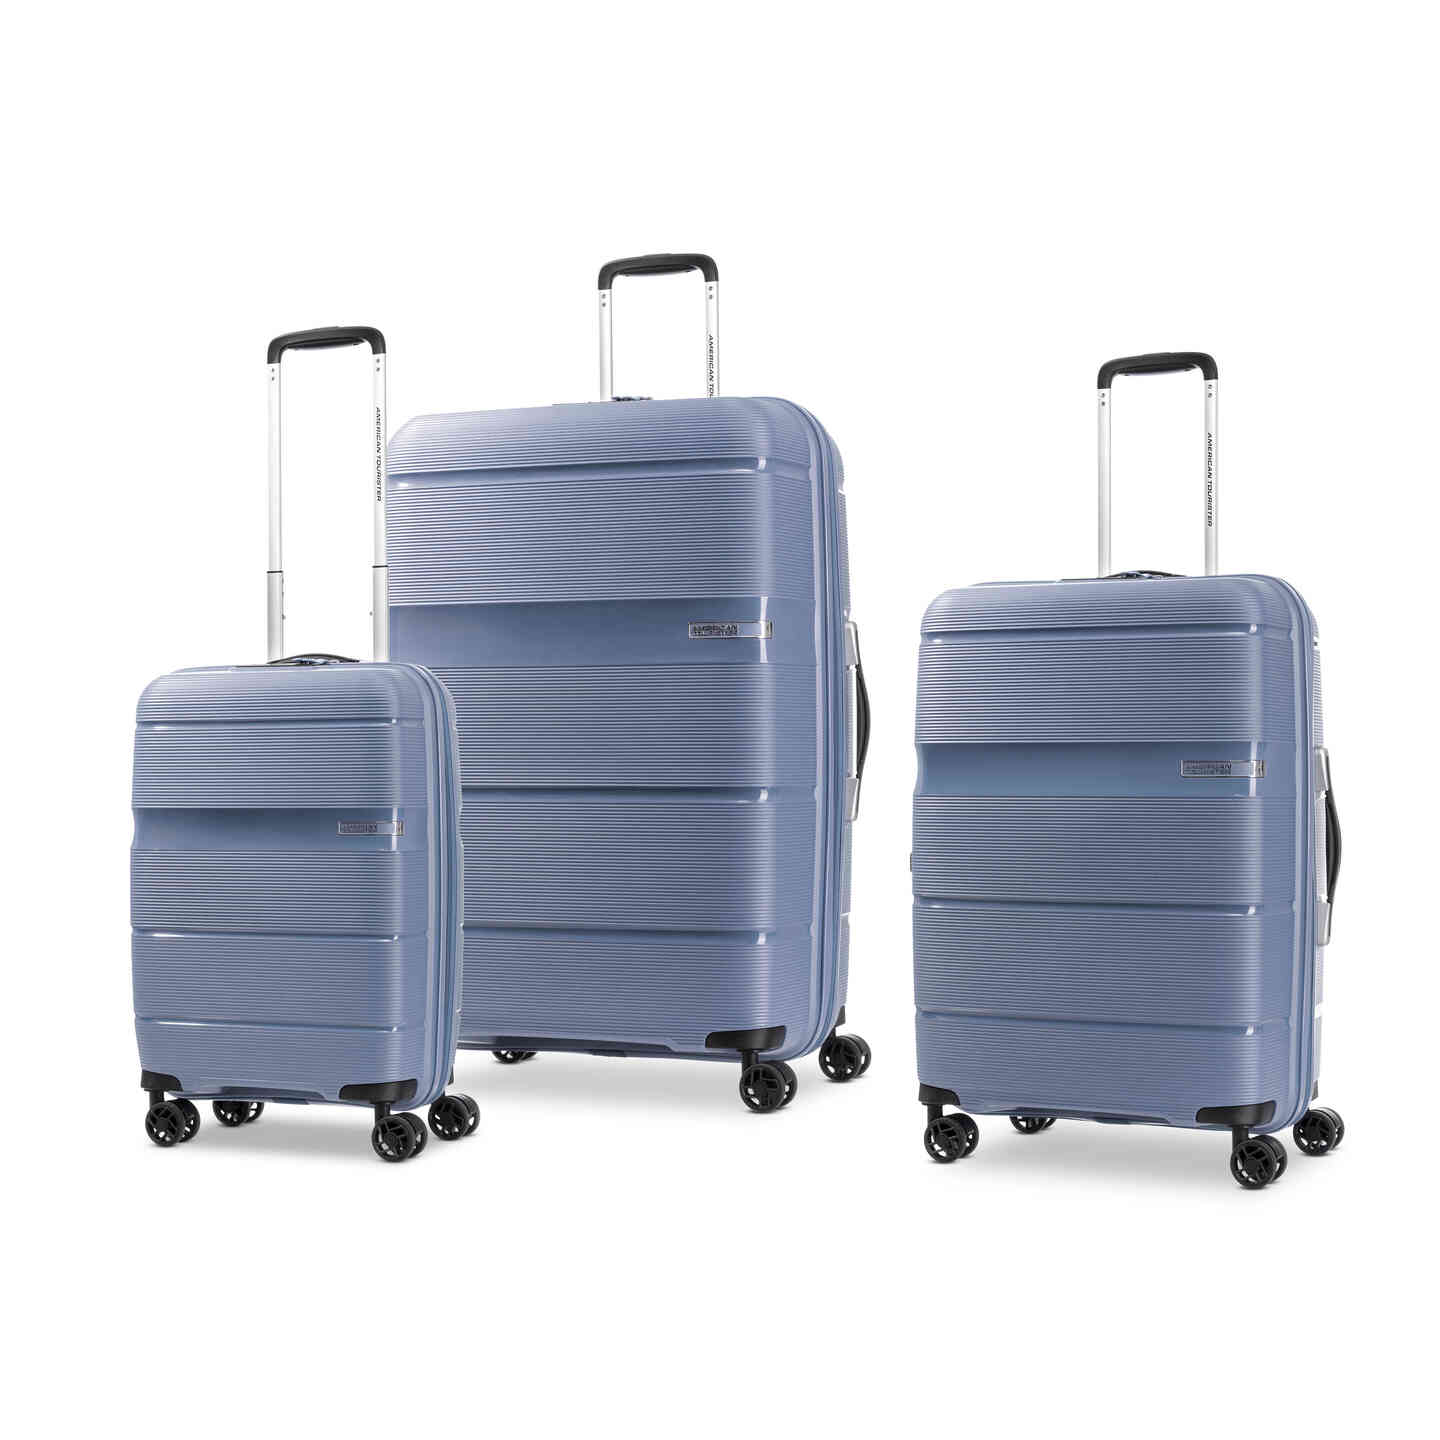 The Linex hardside 3 Piece Set has every size needed to create the perfect trip. Click here to shop now.